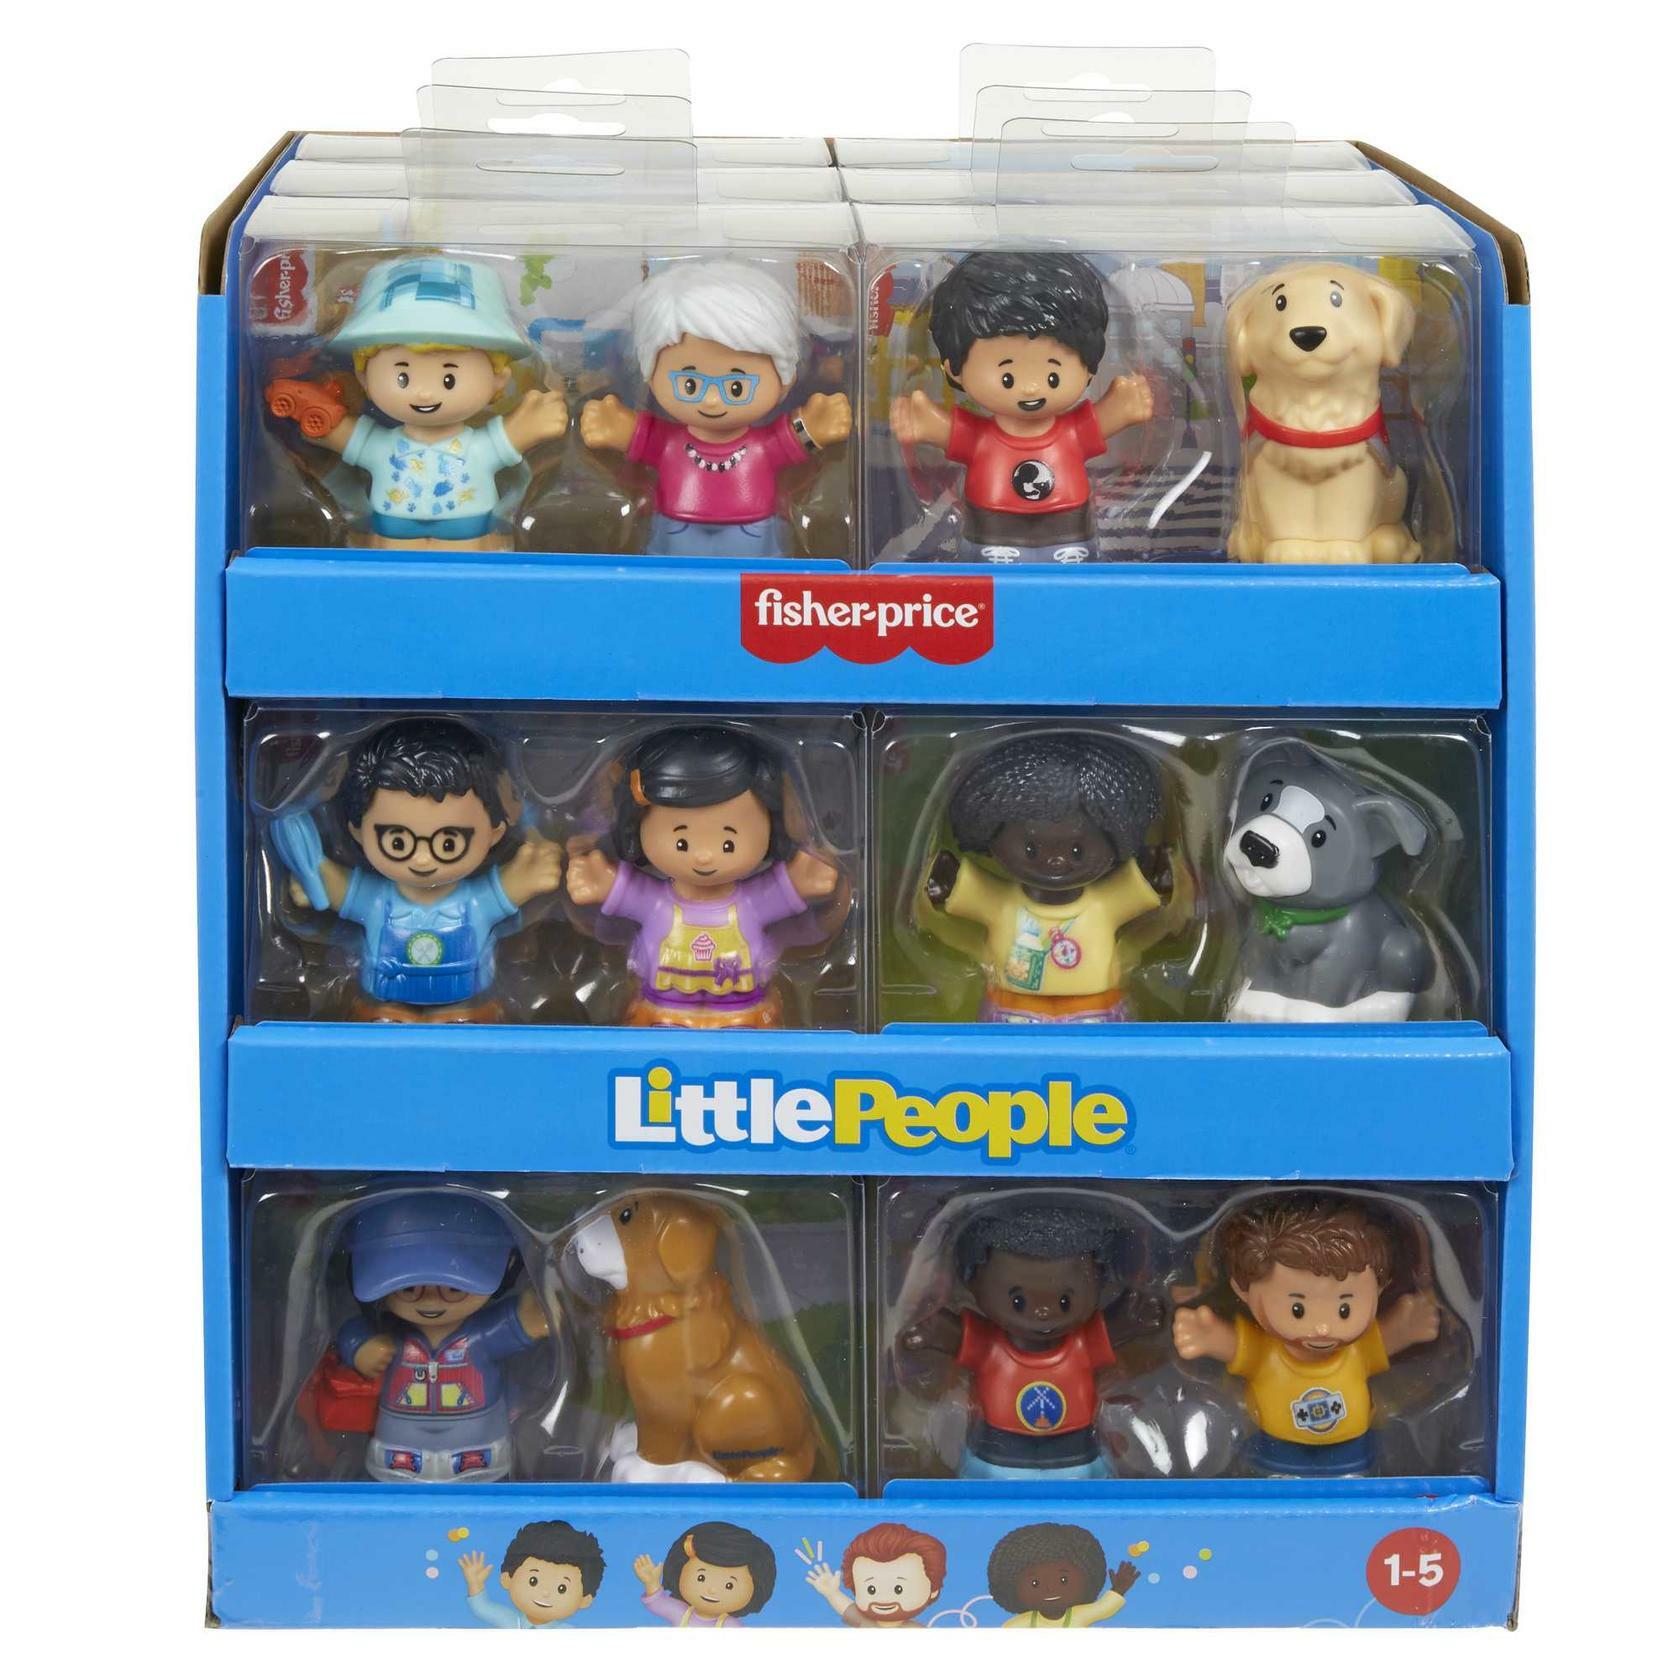 Fisher-Price Little People Figure 2-pack Figurines Play Set Assortment |DVM92